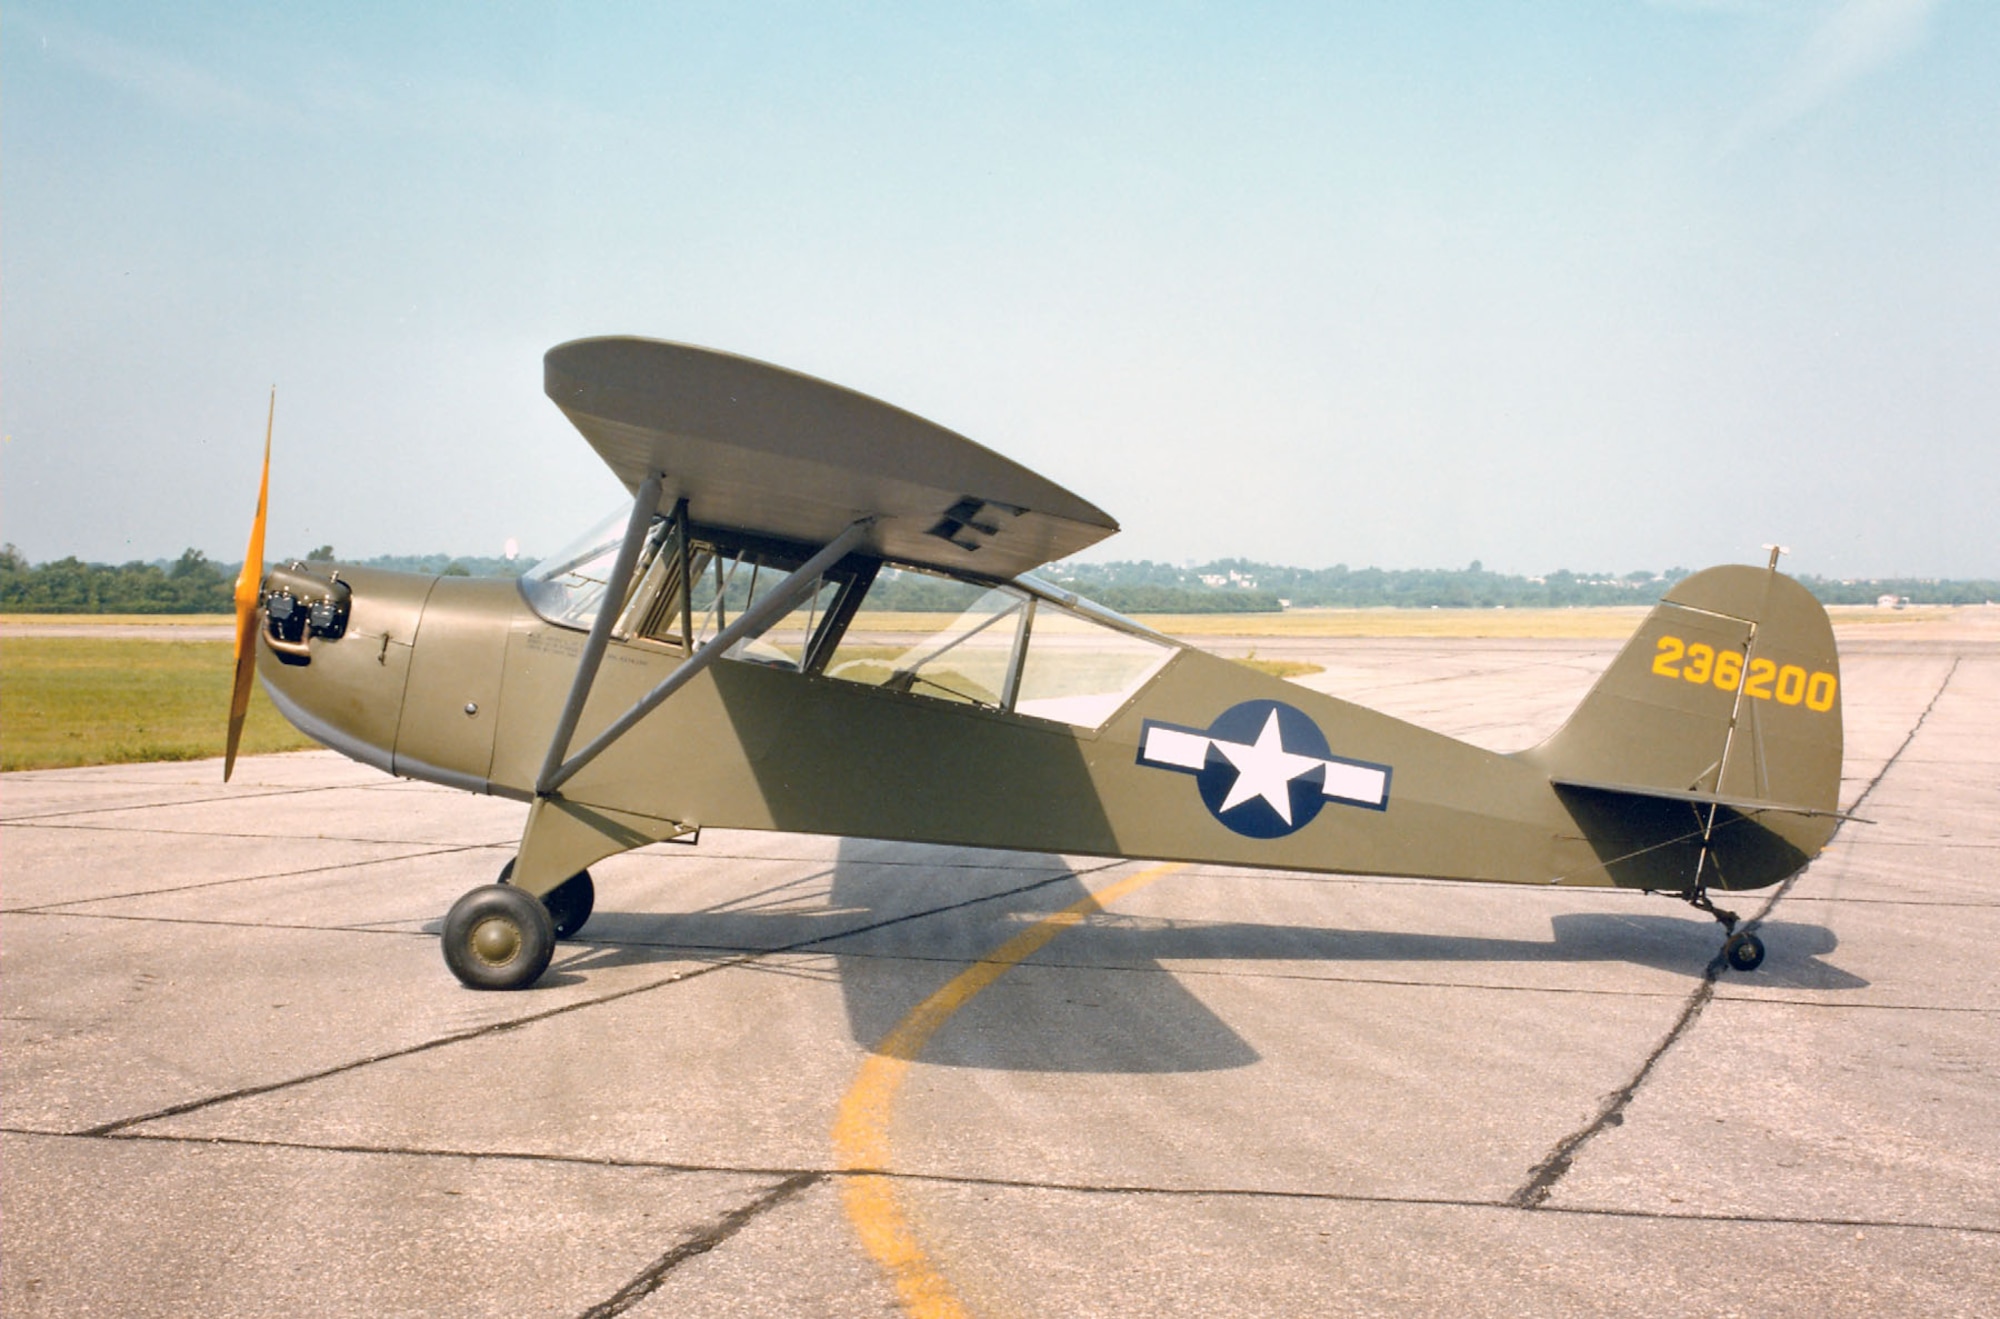 DAYTON, Ohio -- Aeronca L-3B "Grasshopper" at the National Museum of the United States Air Force. (U.S. Air Force photo)